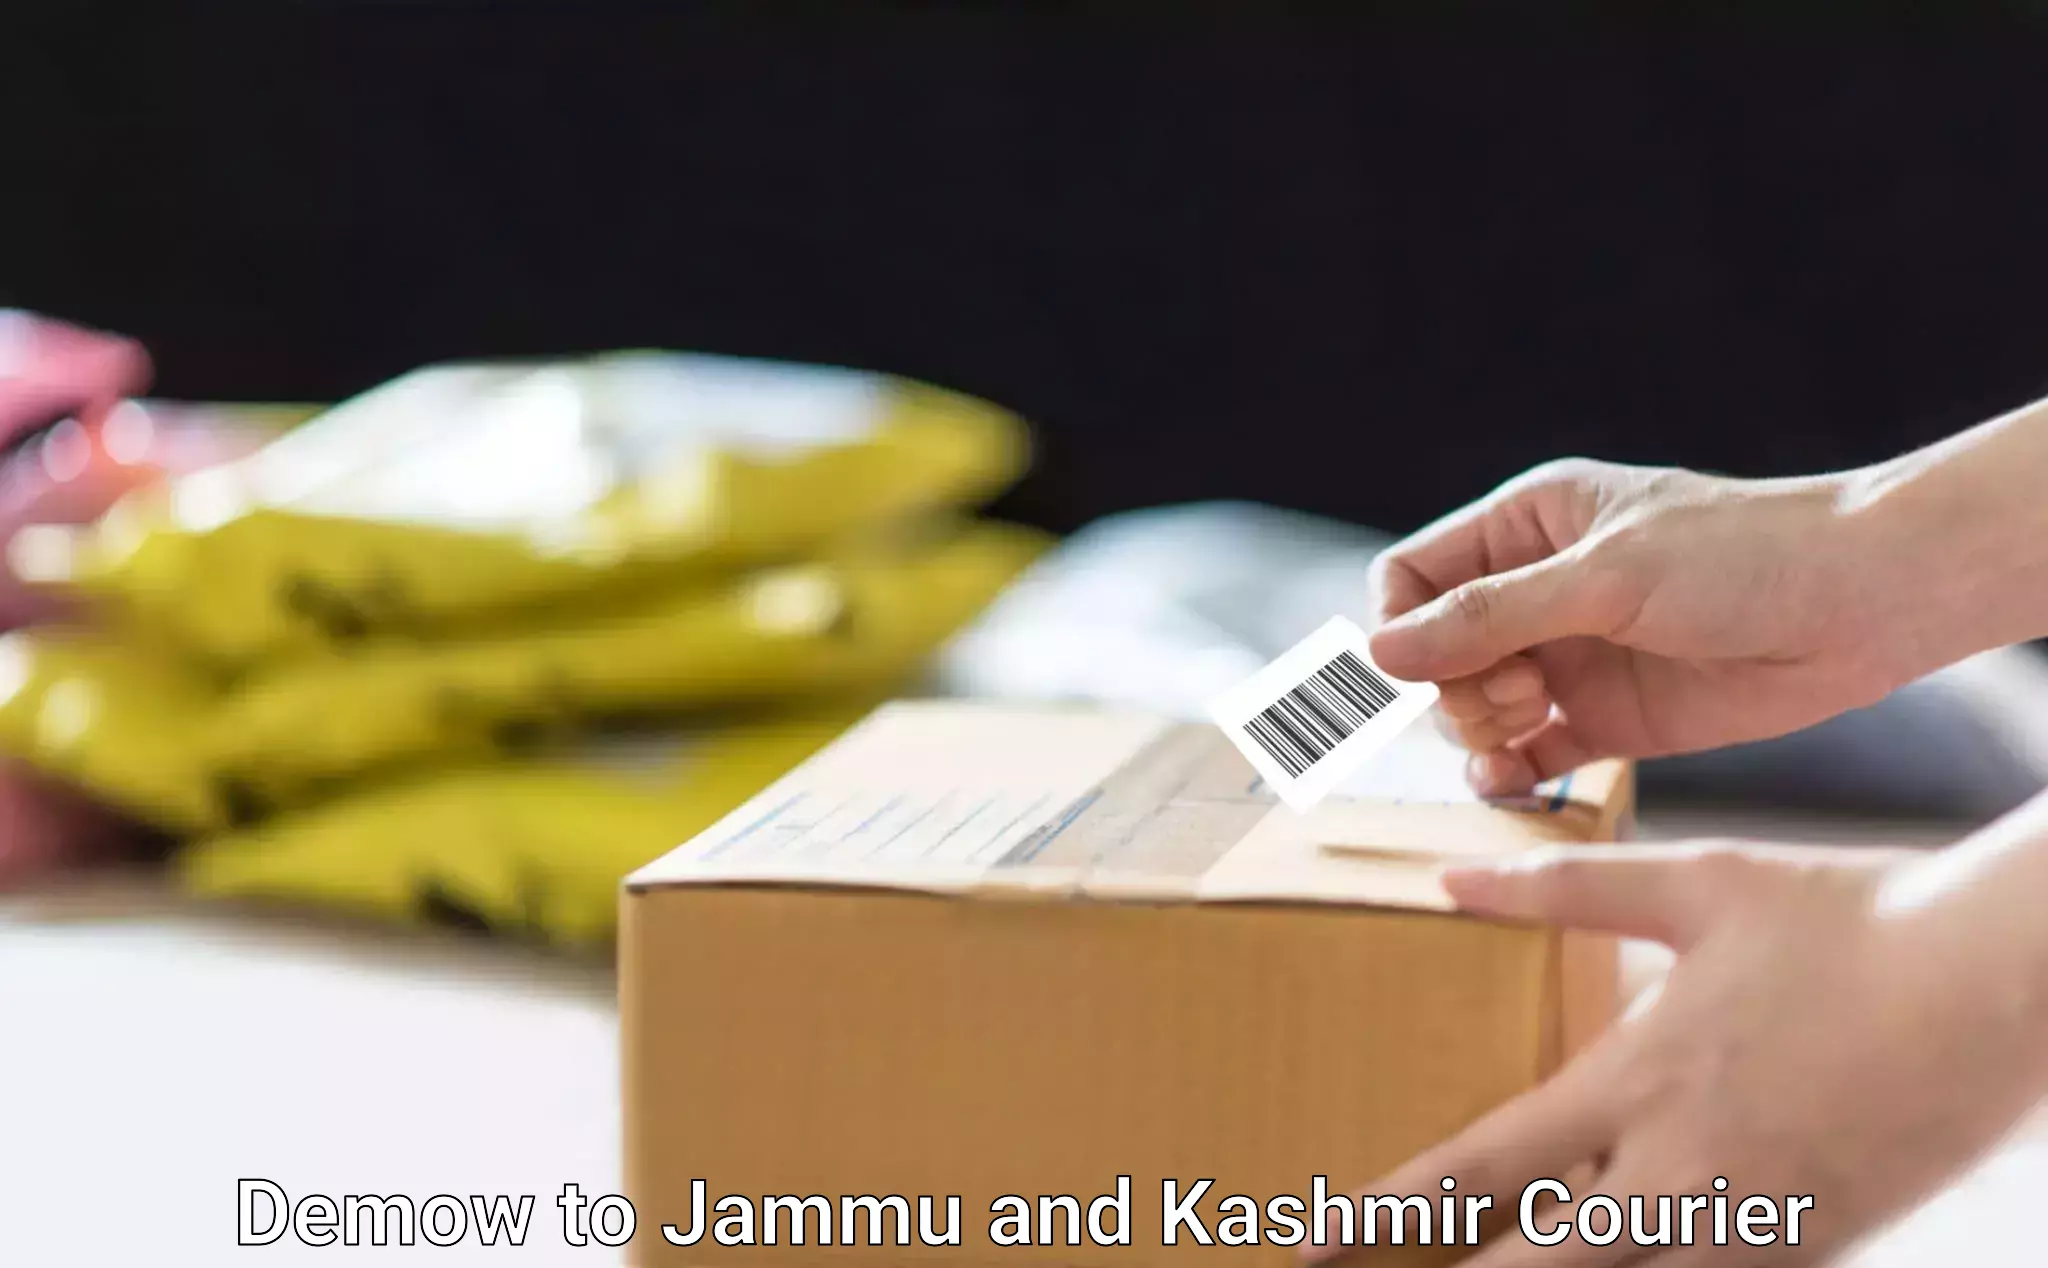 State-of-the-art courier technology Demow to Ramban